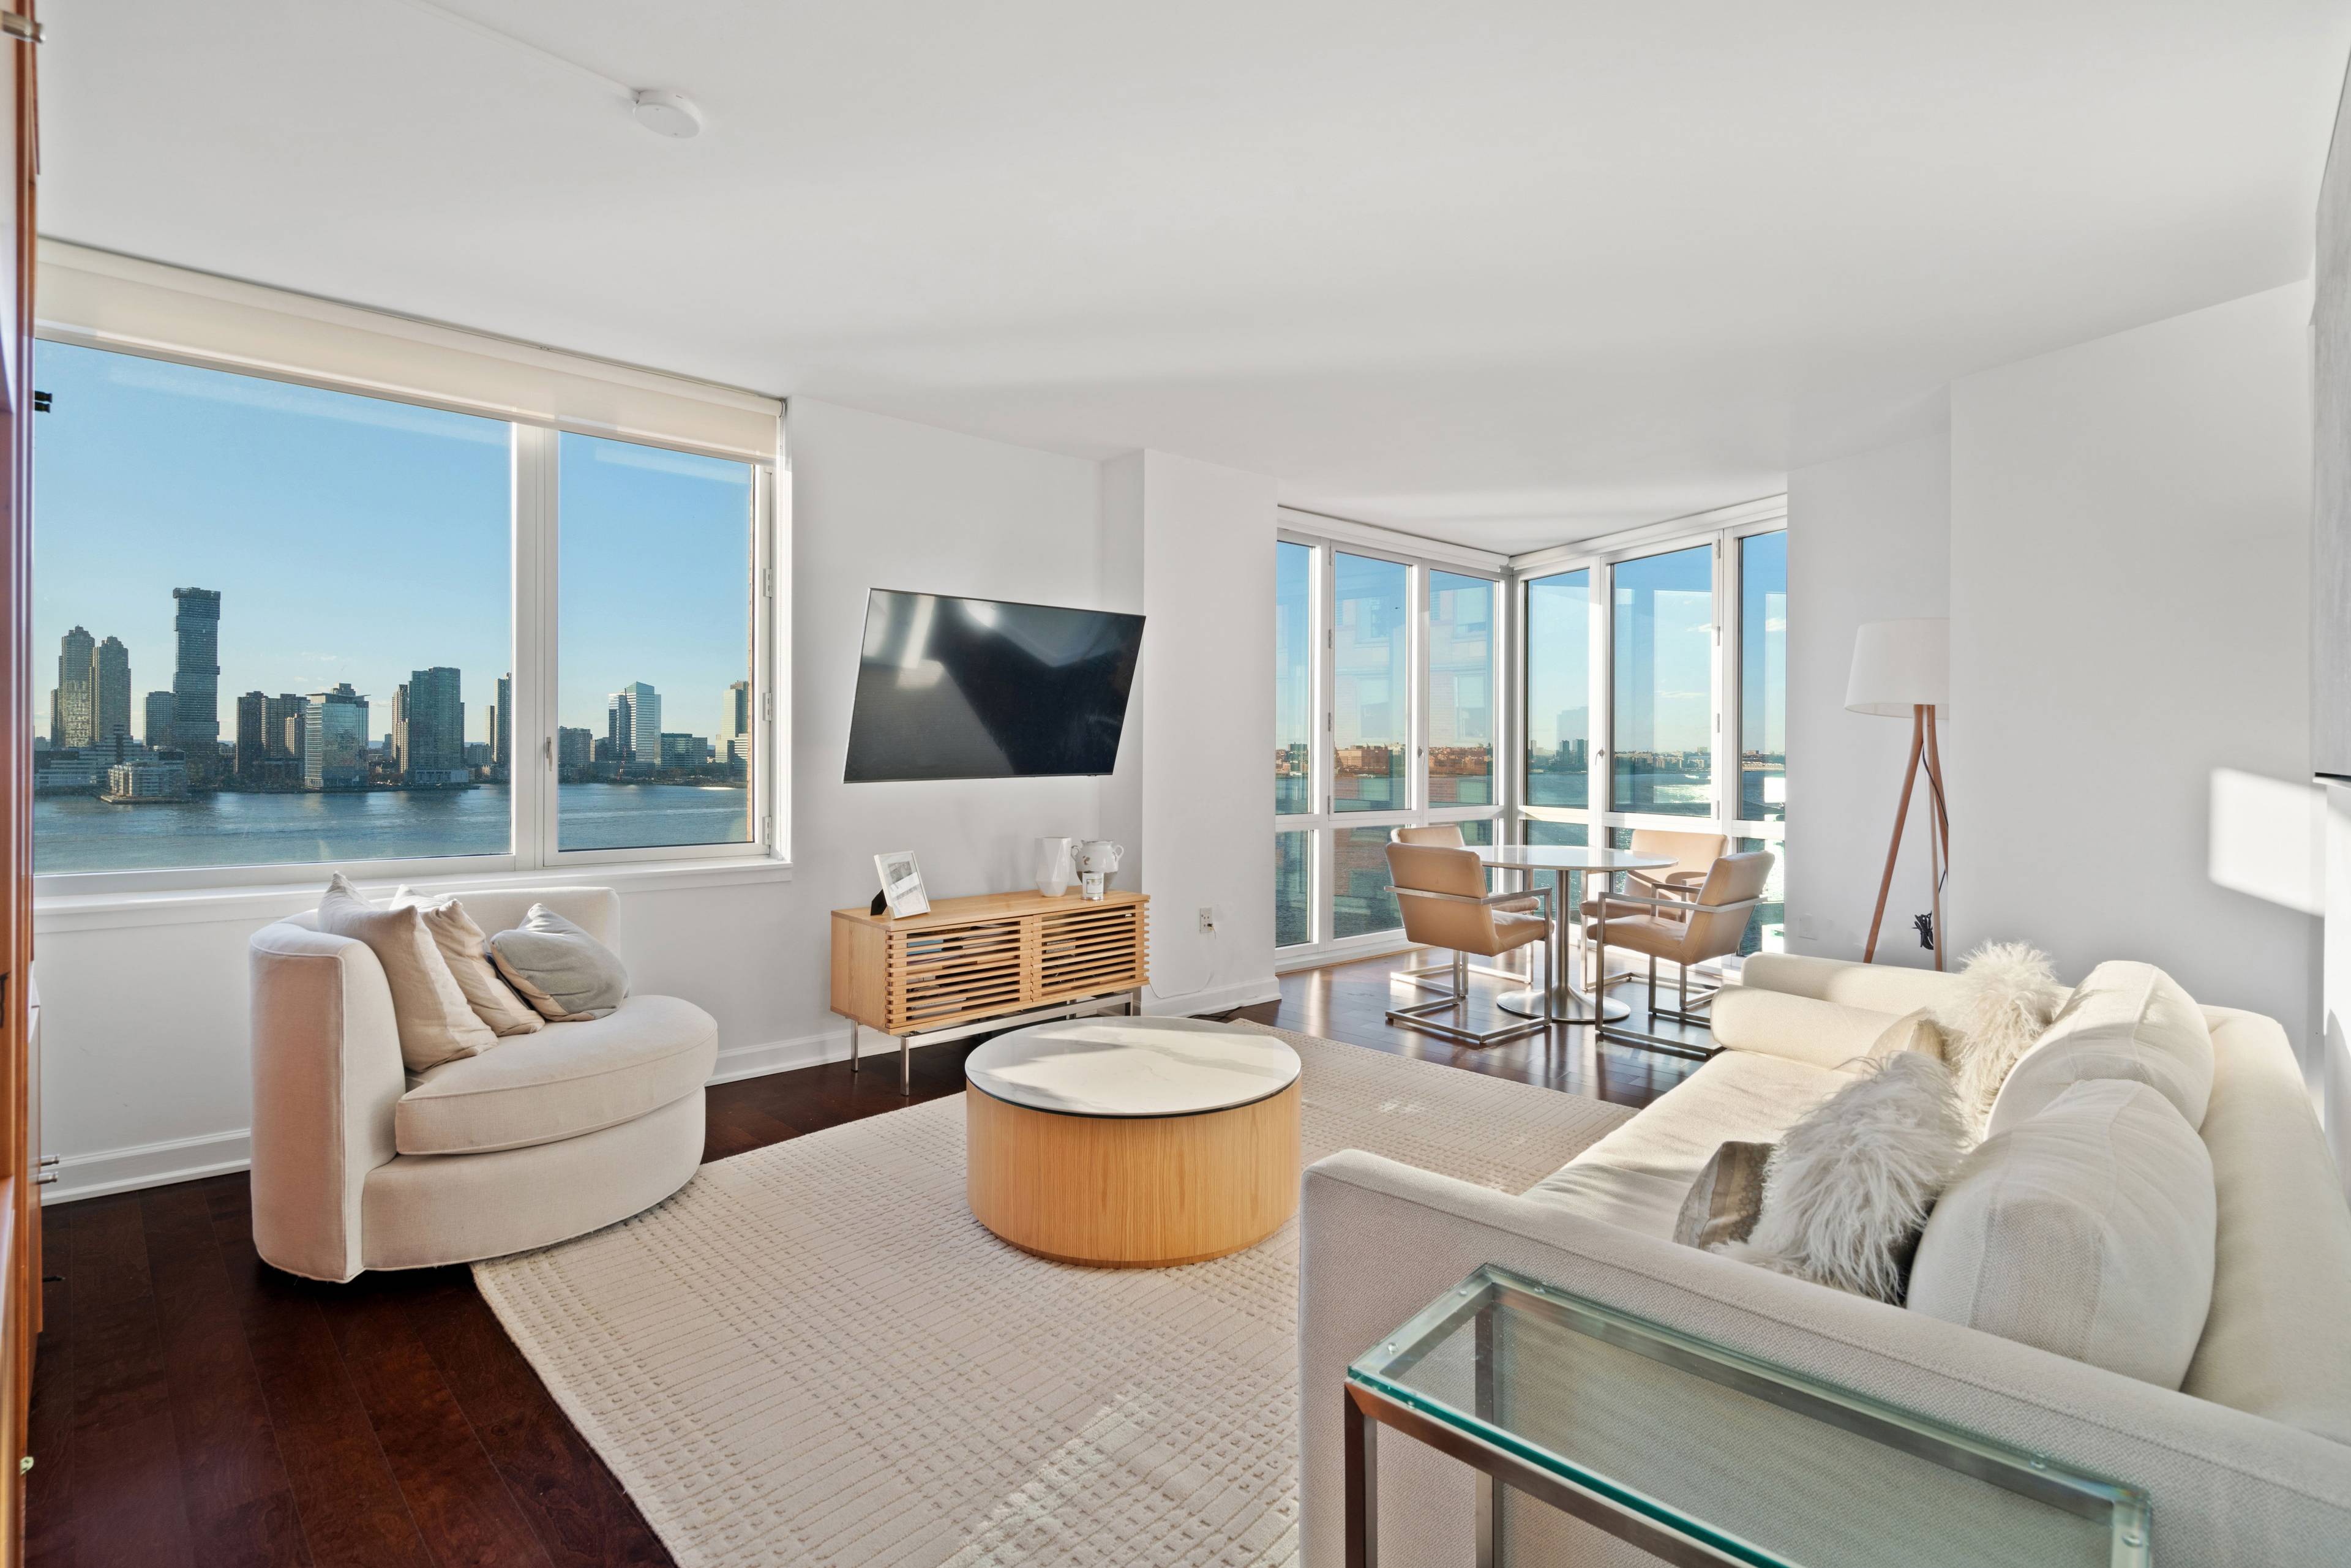 BatteryPark/Tribeca Furnished 3 bed+3 baths-Private Parking-Water Views!!